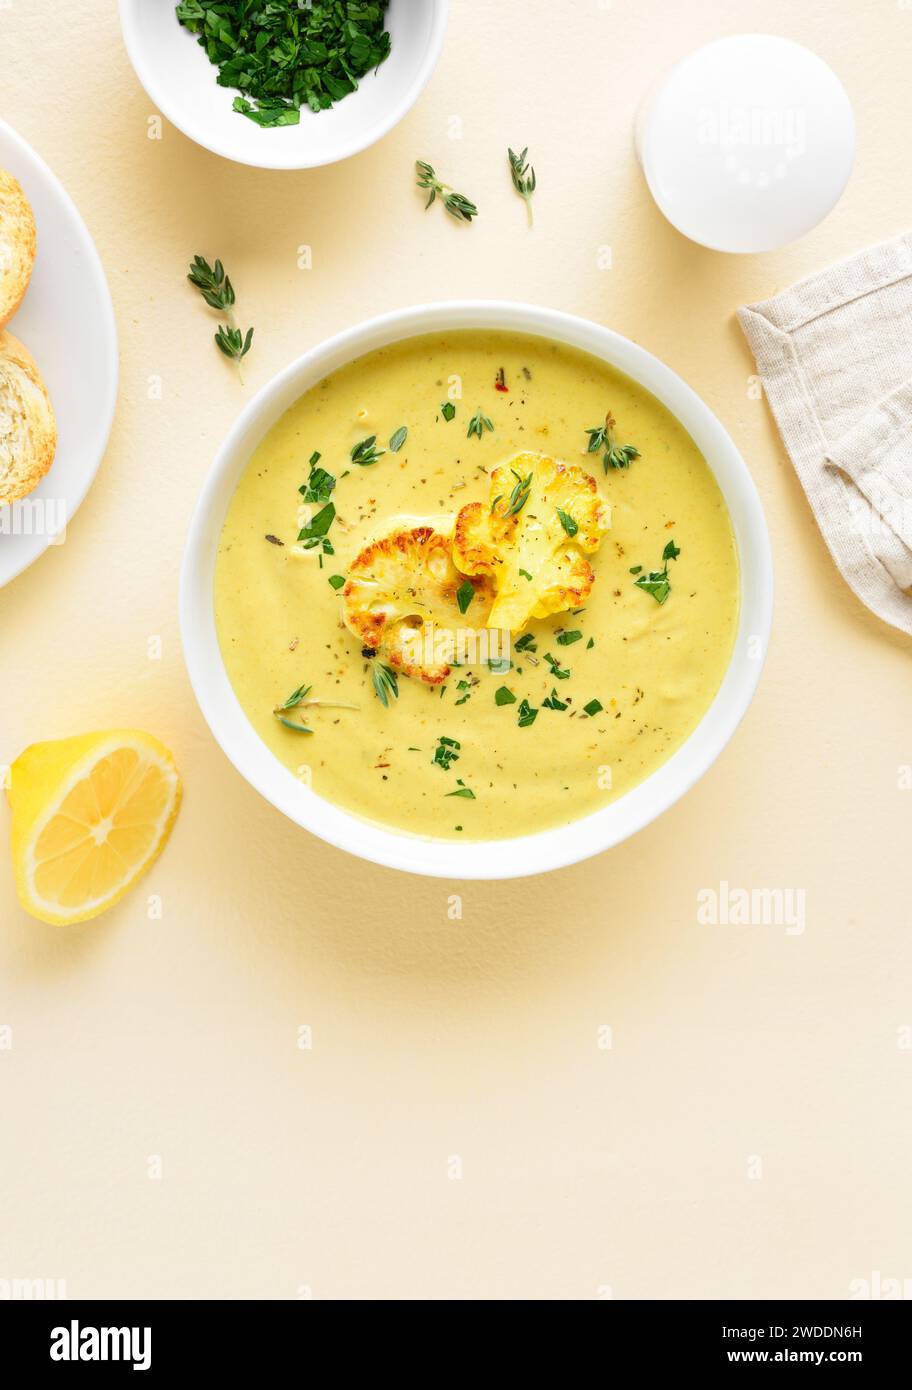 Cauliflower cheese soup in bowl over light background. Vegetarian or healthy diet food concept. Top view, flat lay Stock Photo